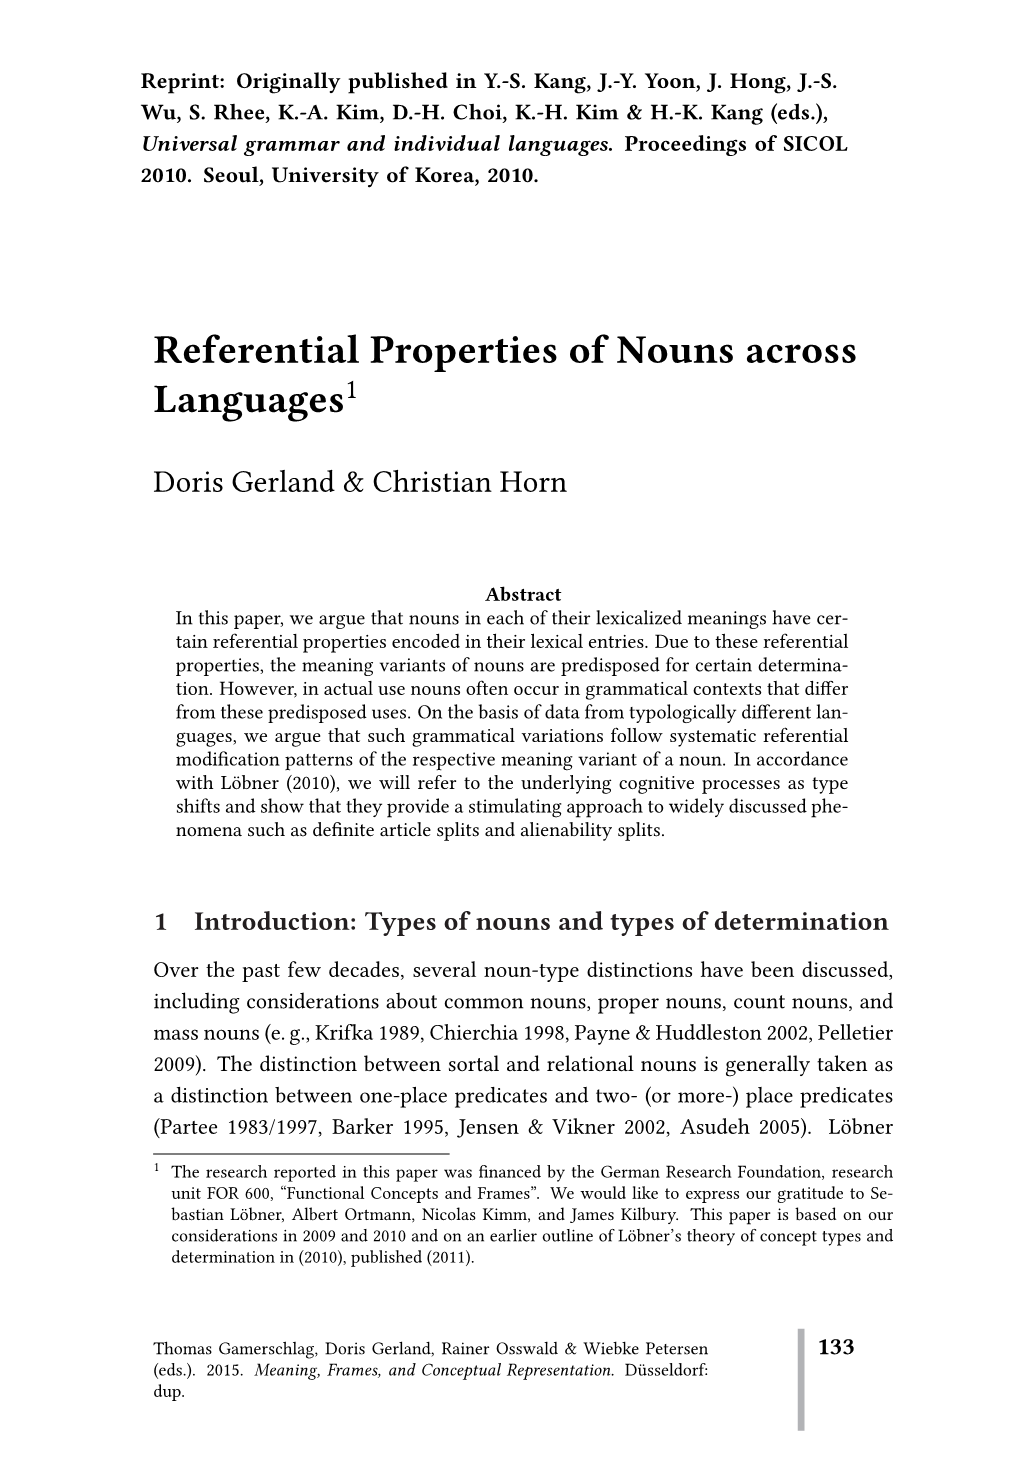 Referential Properties of Nouns Across Languages1